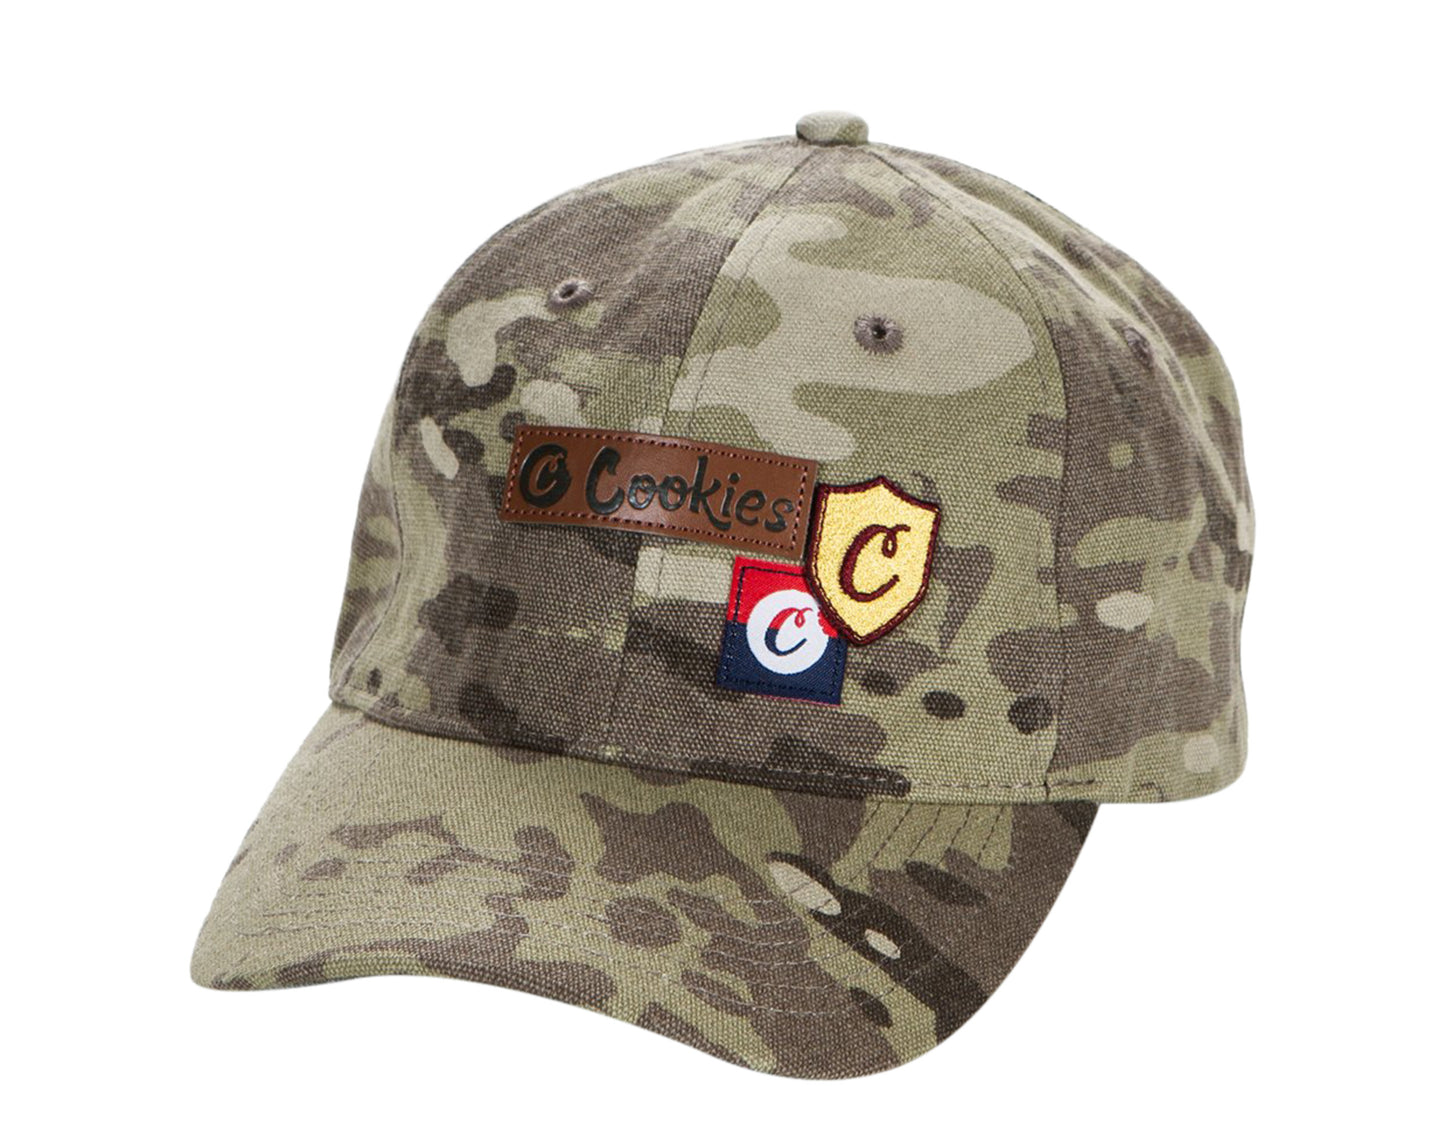 Cookies Backcountry Cotton Canvas Patchwork Tan Camo Dad Hat 1546X4315-TAC